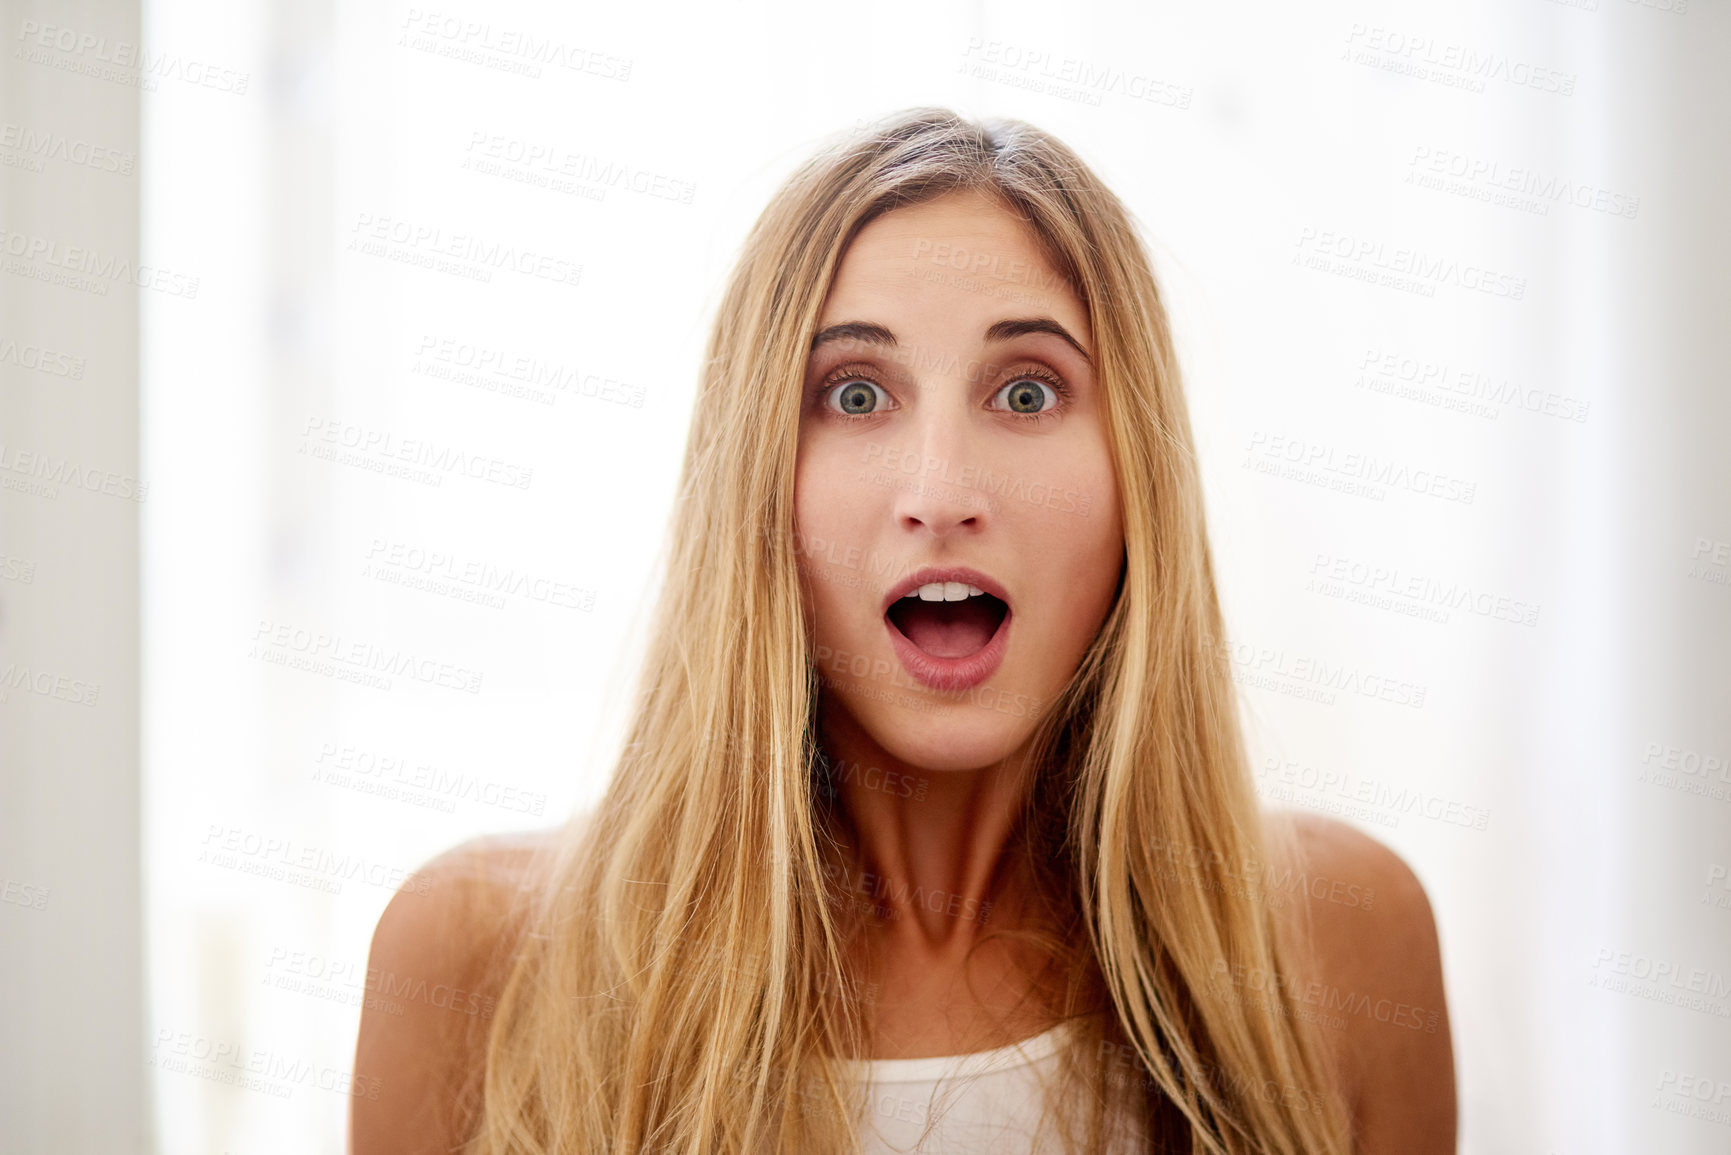 Buy stock photo Portrait of a young woman pulling a surprised face at home